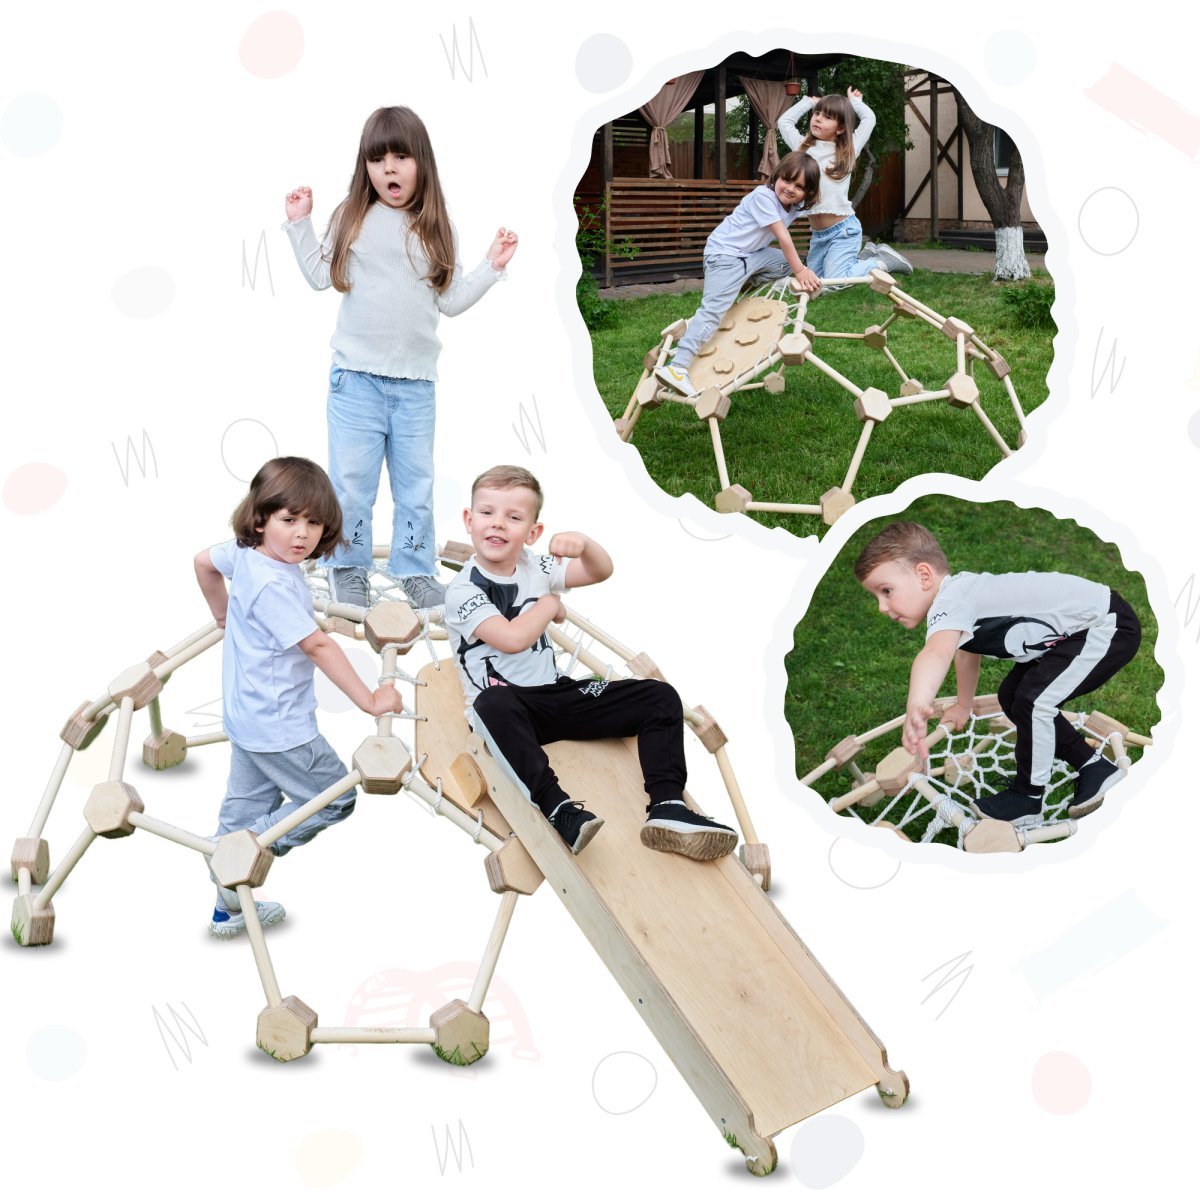 2in1 Climbing Set: Wooden Climbing Geodome with Slide Board